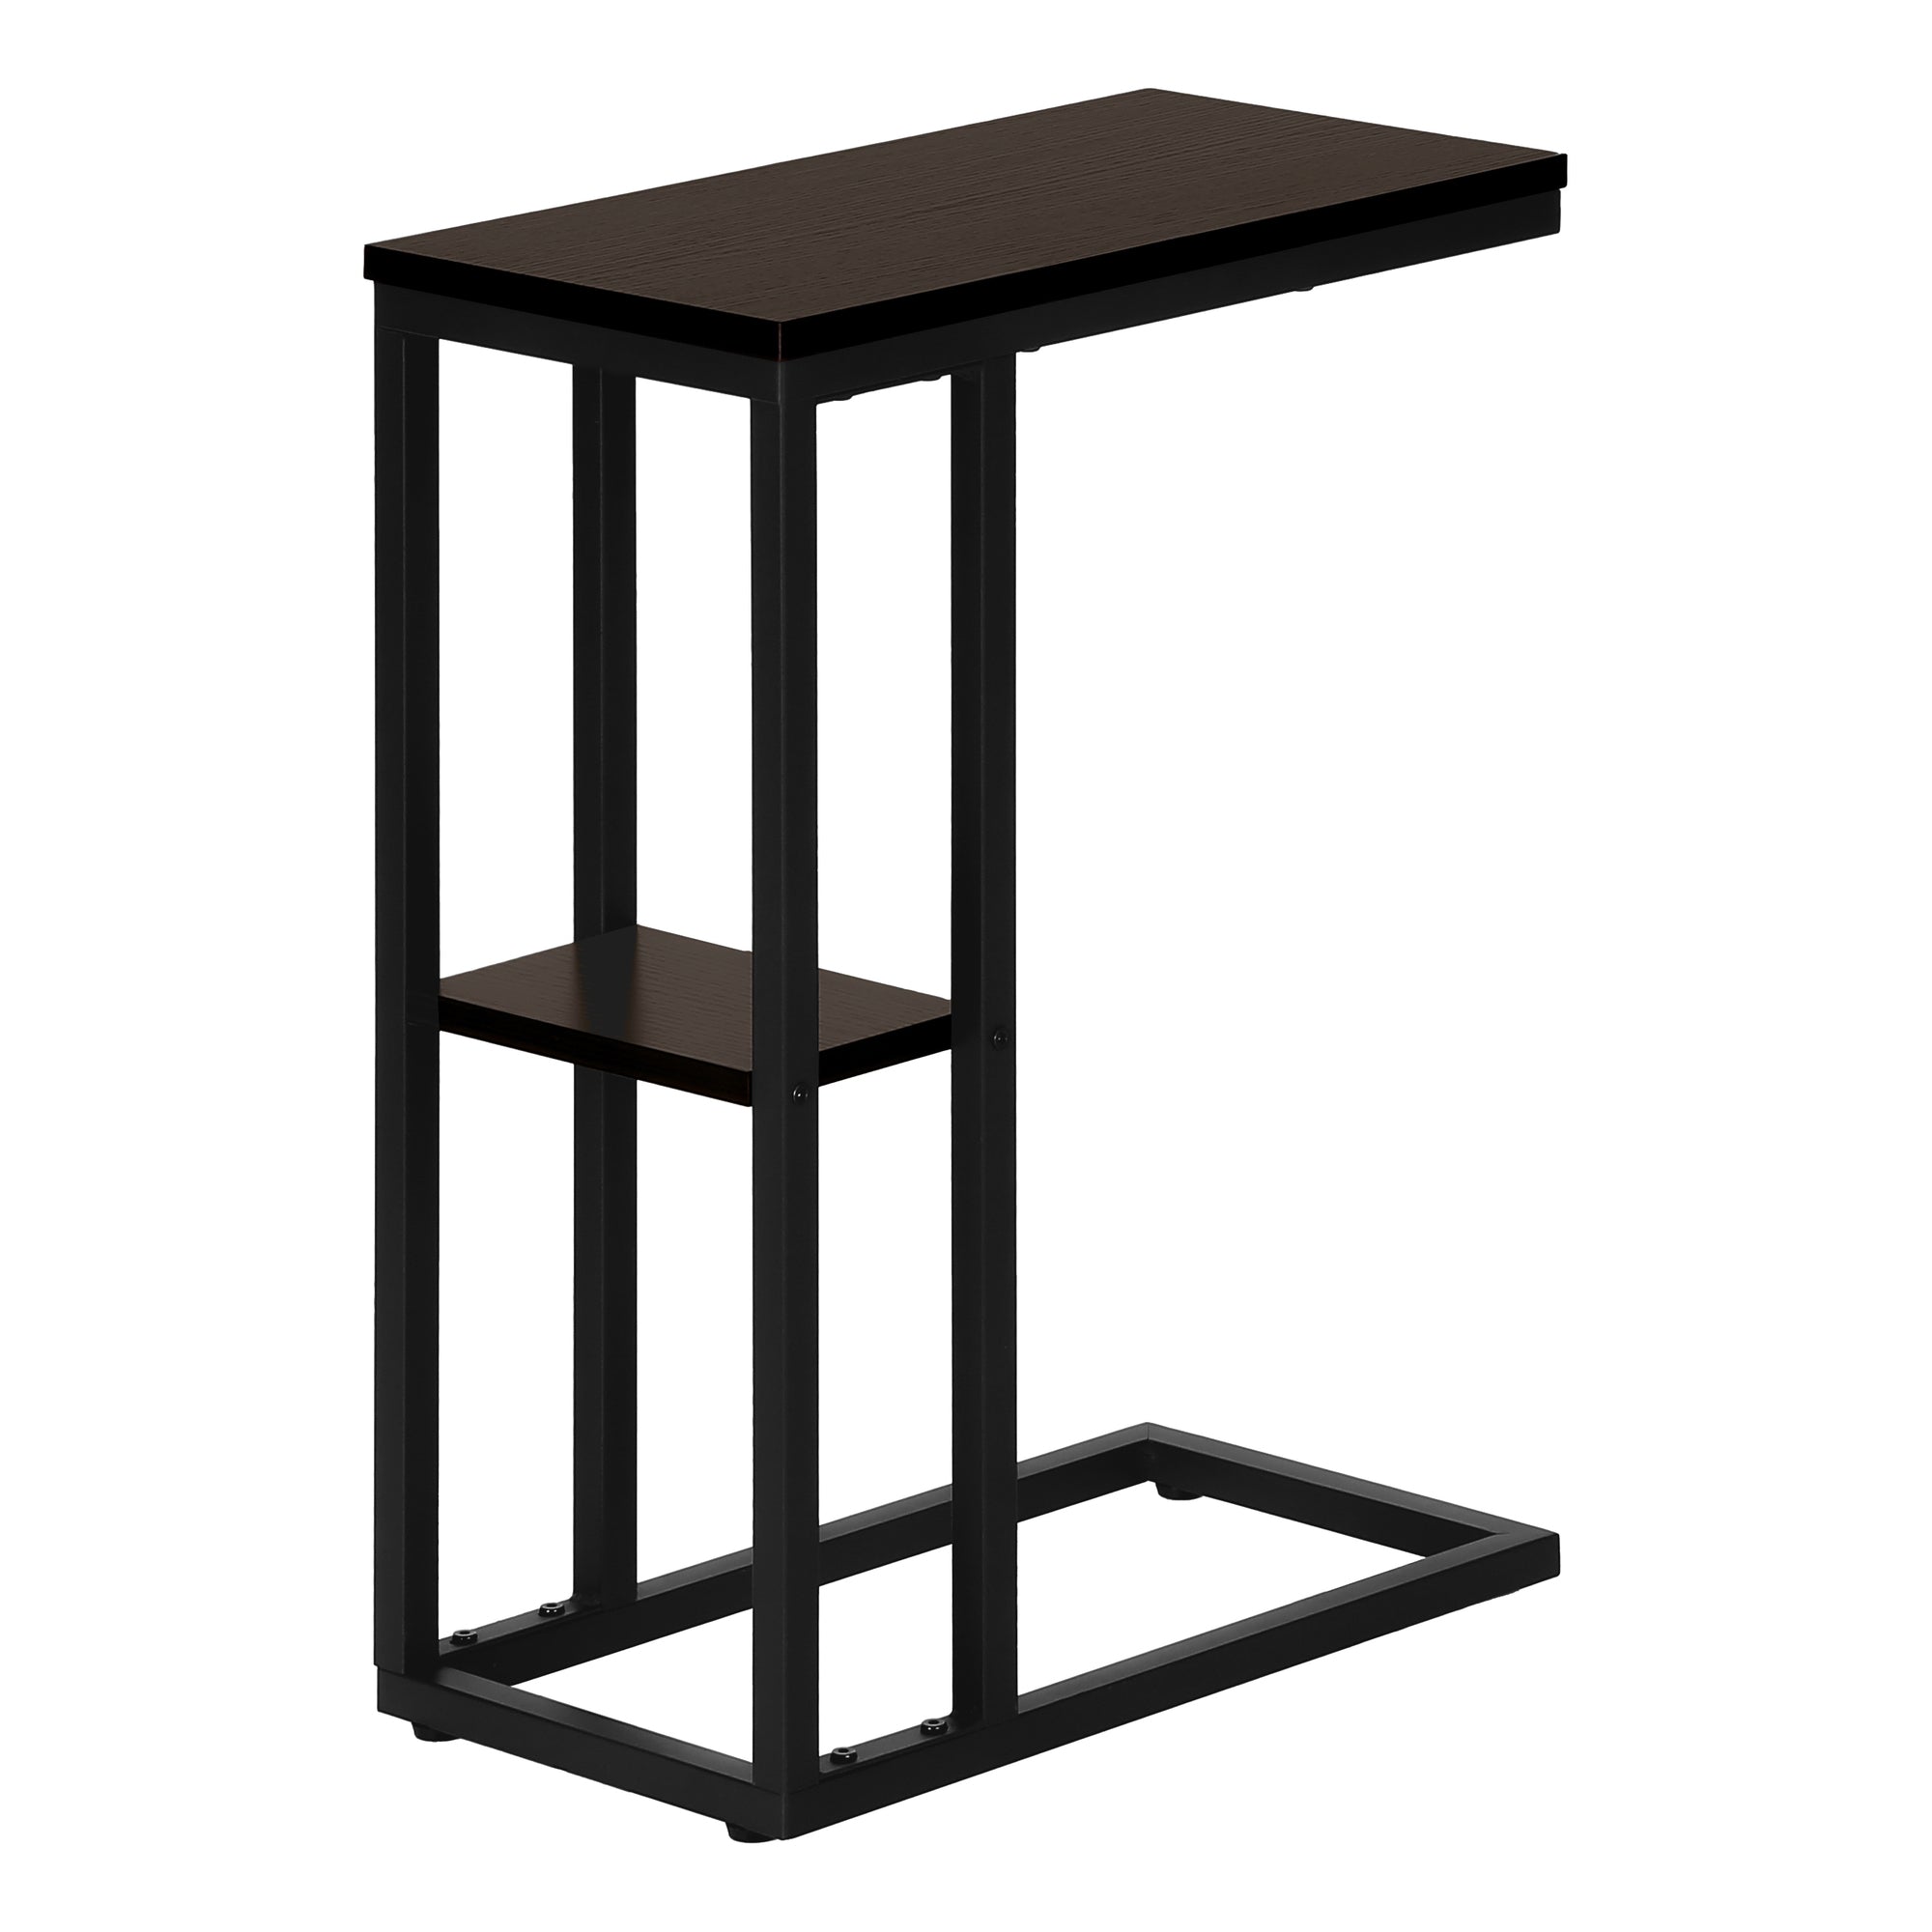 MN-163670    Accent Table, C-Shaped, End, Side, Snack, Living Room, Bedroom, Metal Legs, Laminate, Espresso, Black, Contemporary, Modern